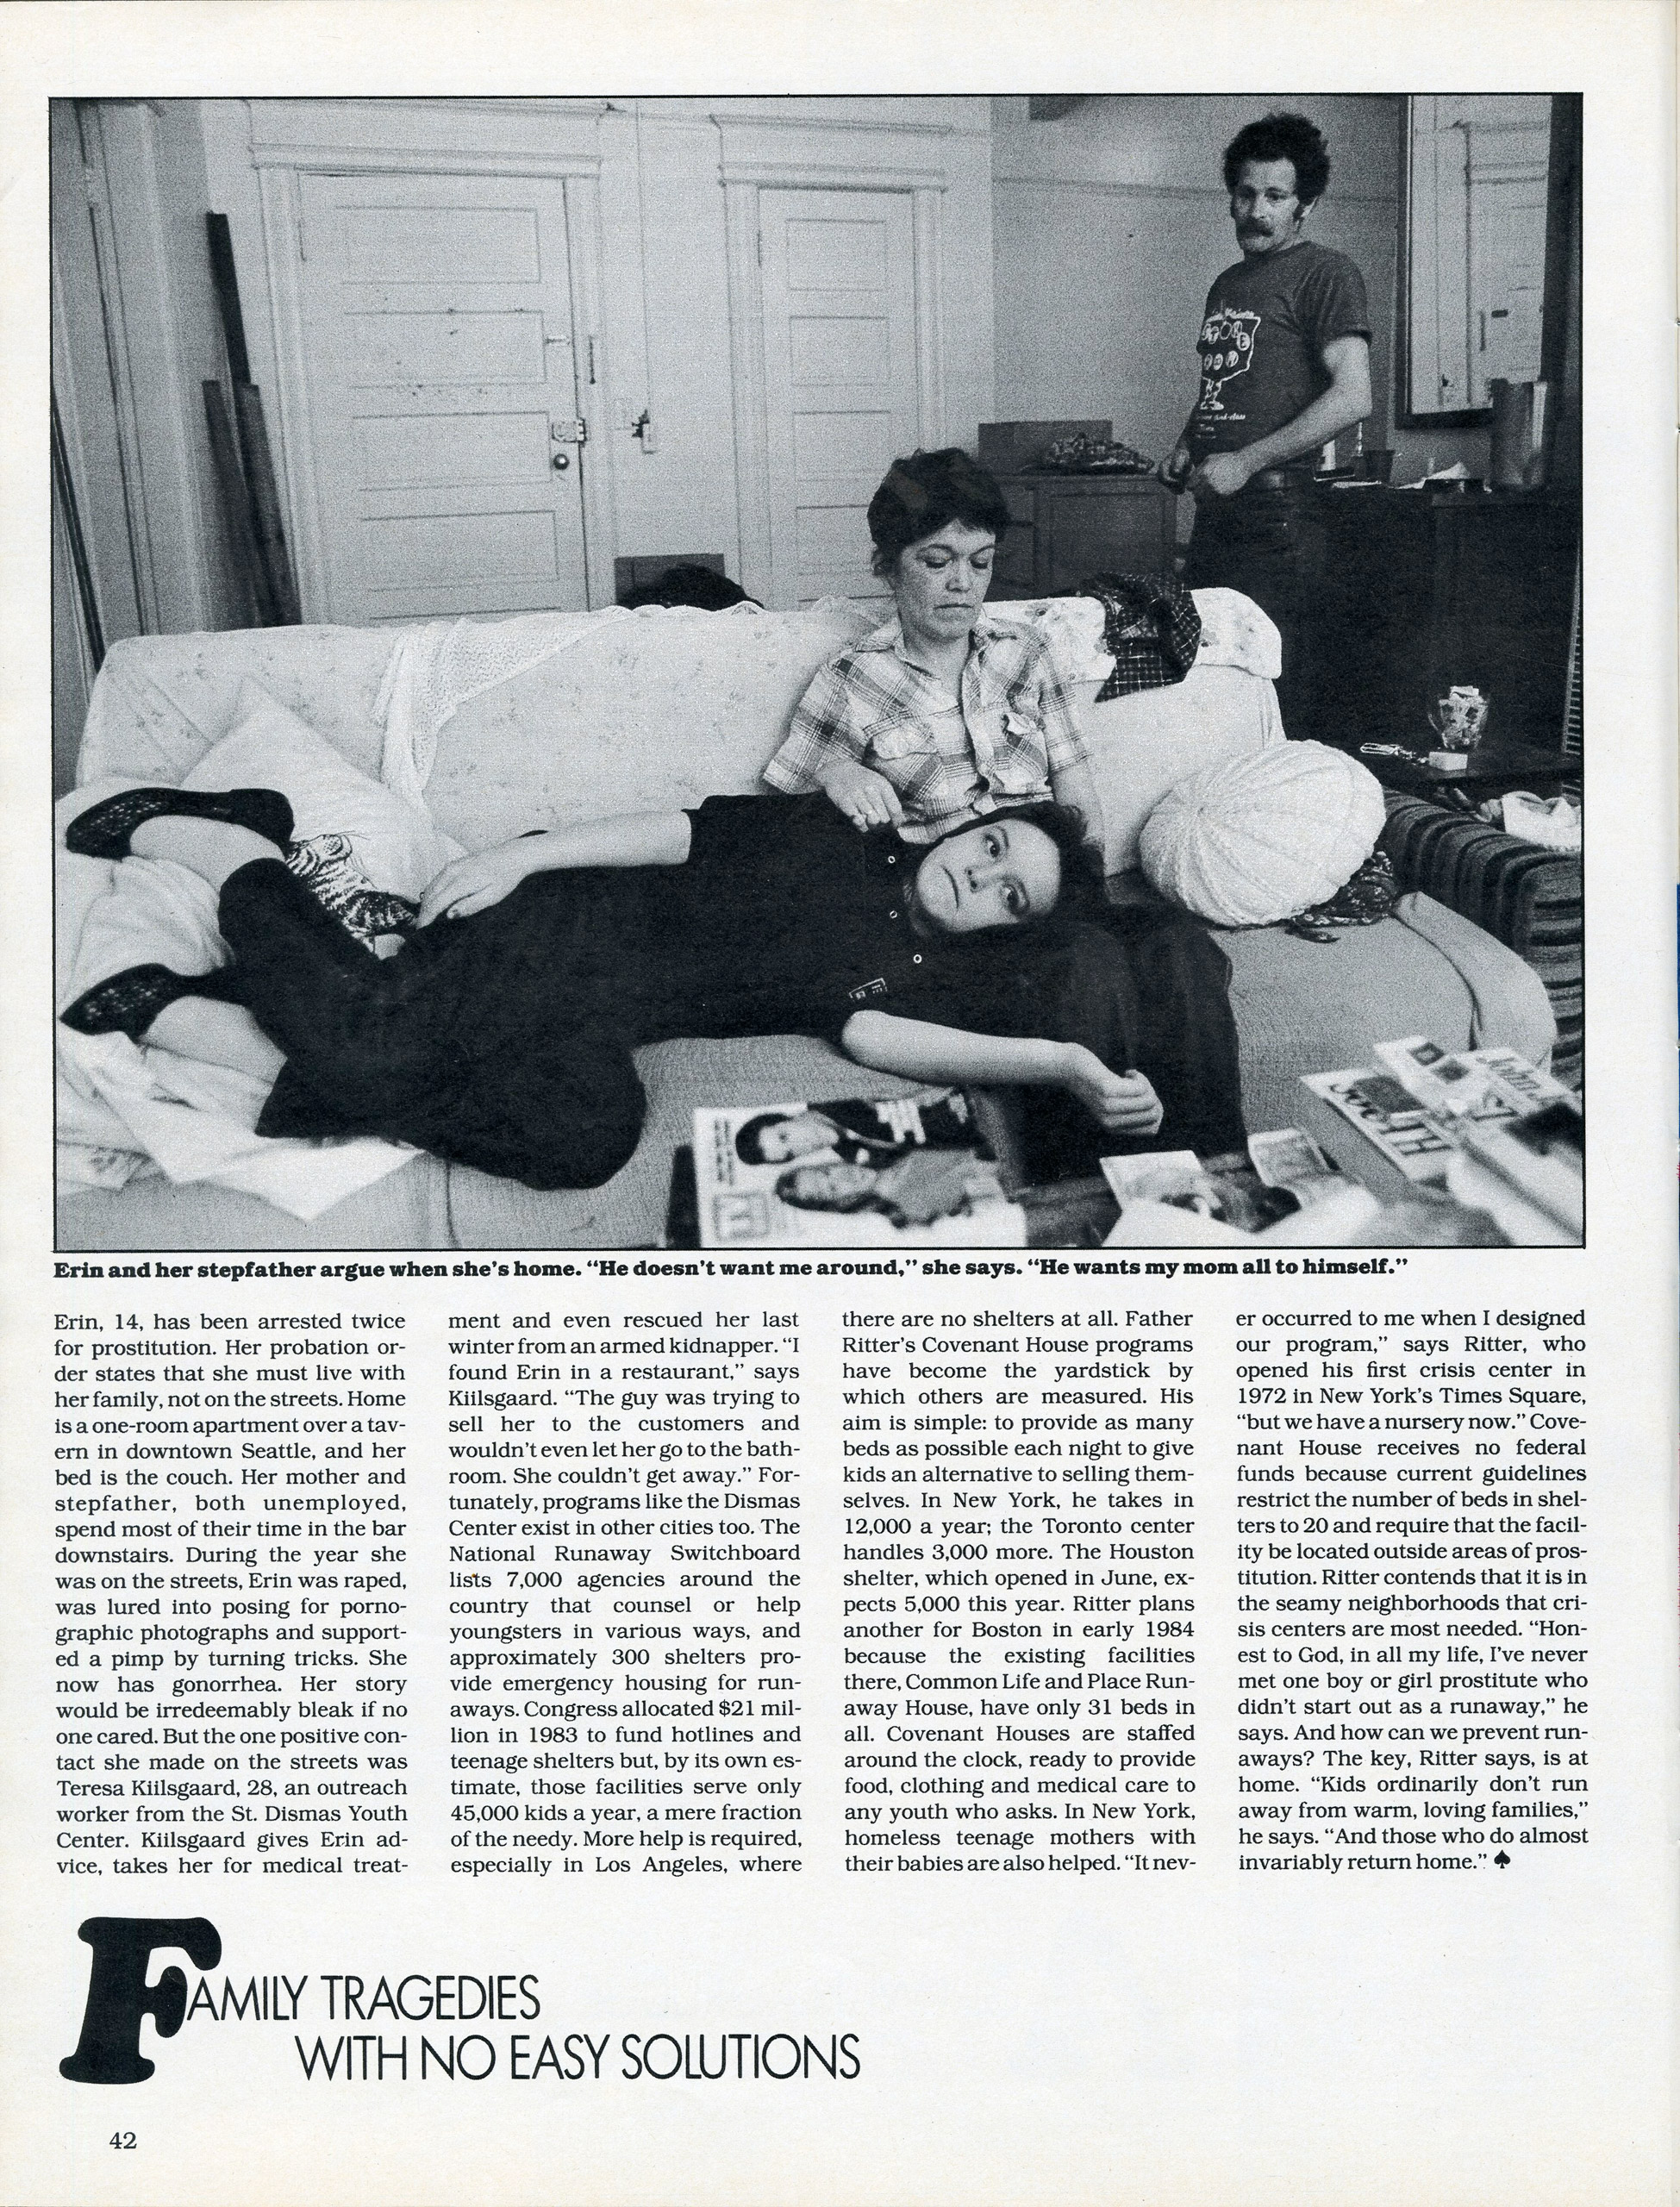 "Streets of the Lost: Runaway Kids eke out a mean life in Seattle"—LIFE magazine, July 1983.